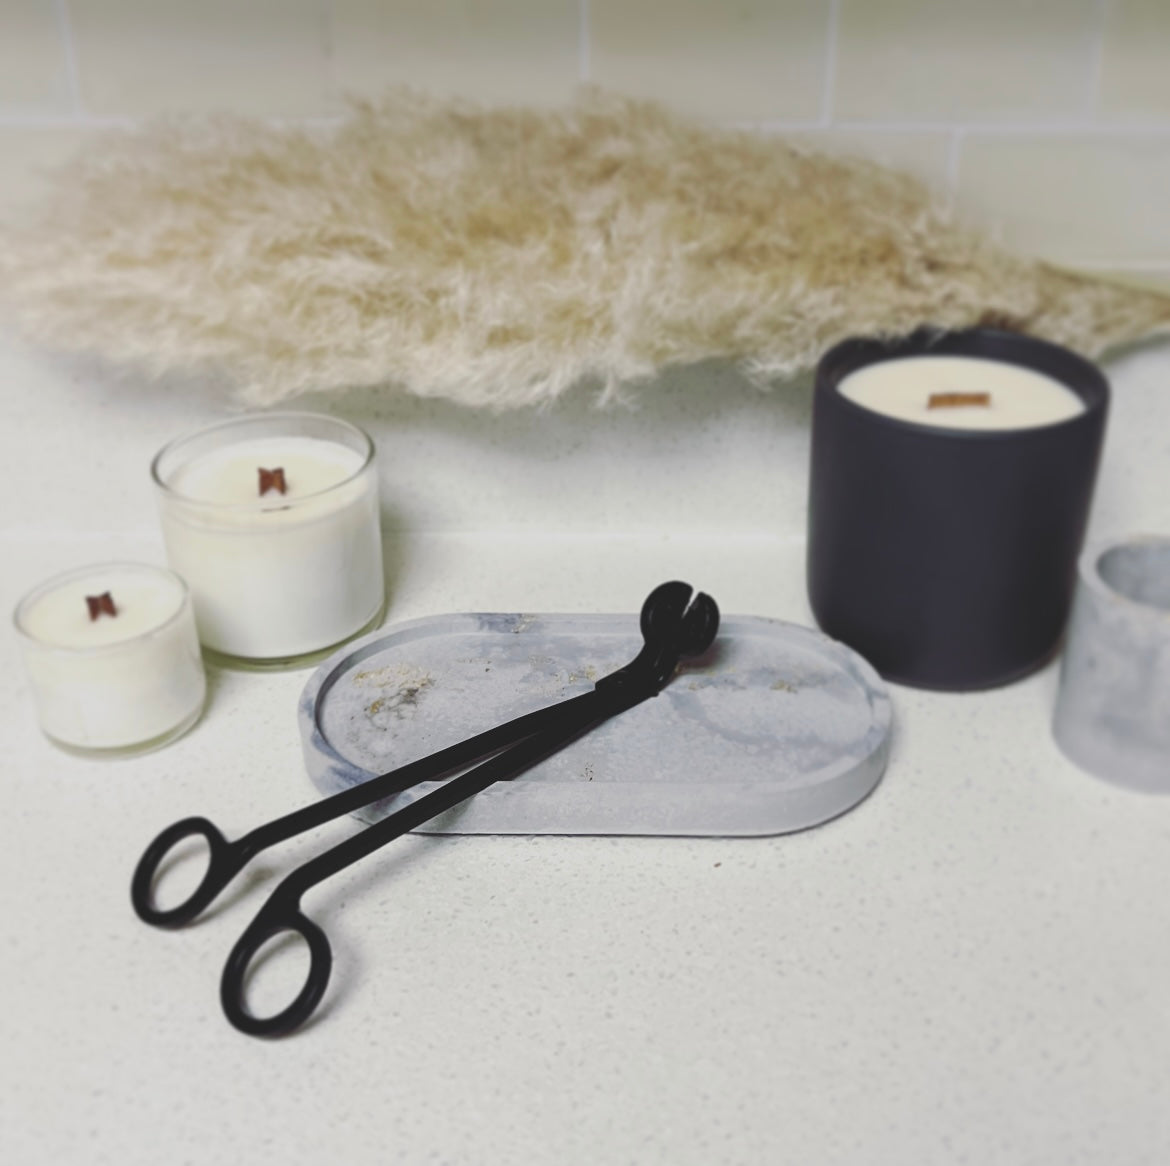 Wick Trimmers - Lavender and Lace Candles